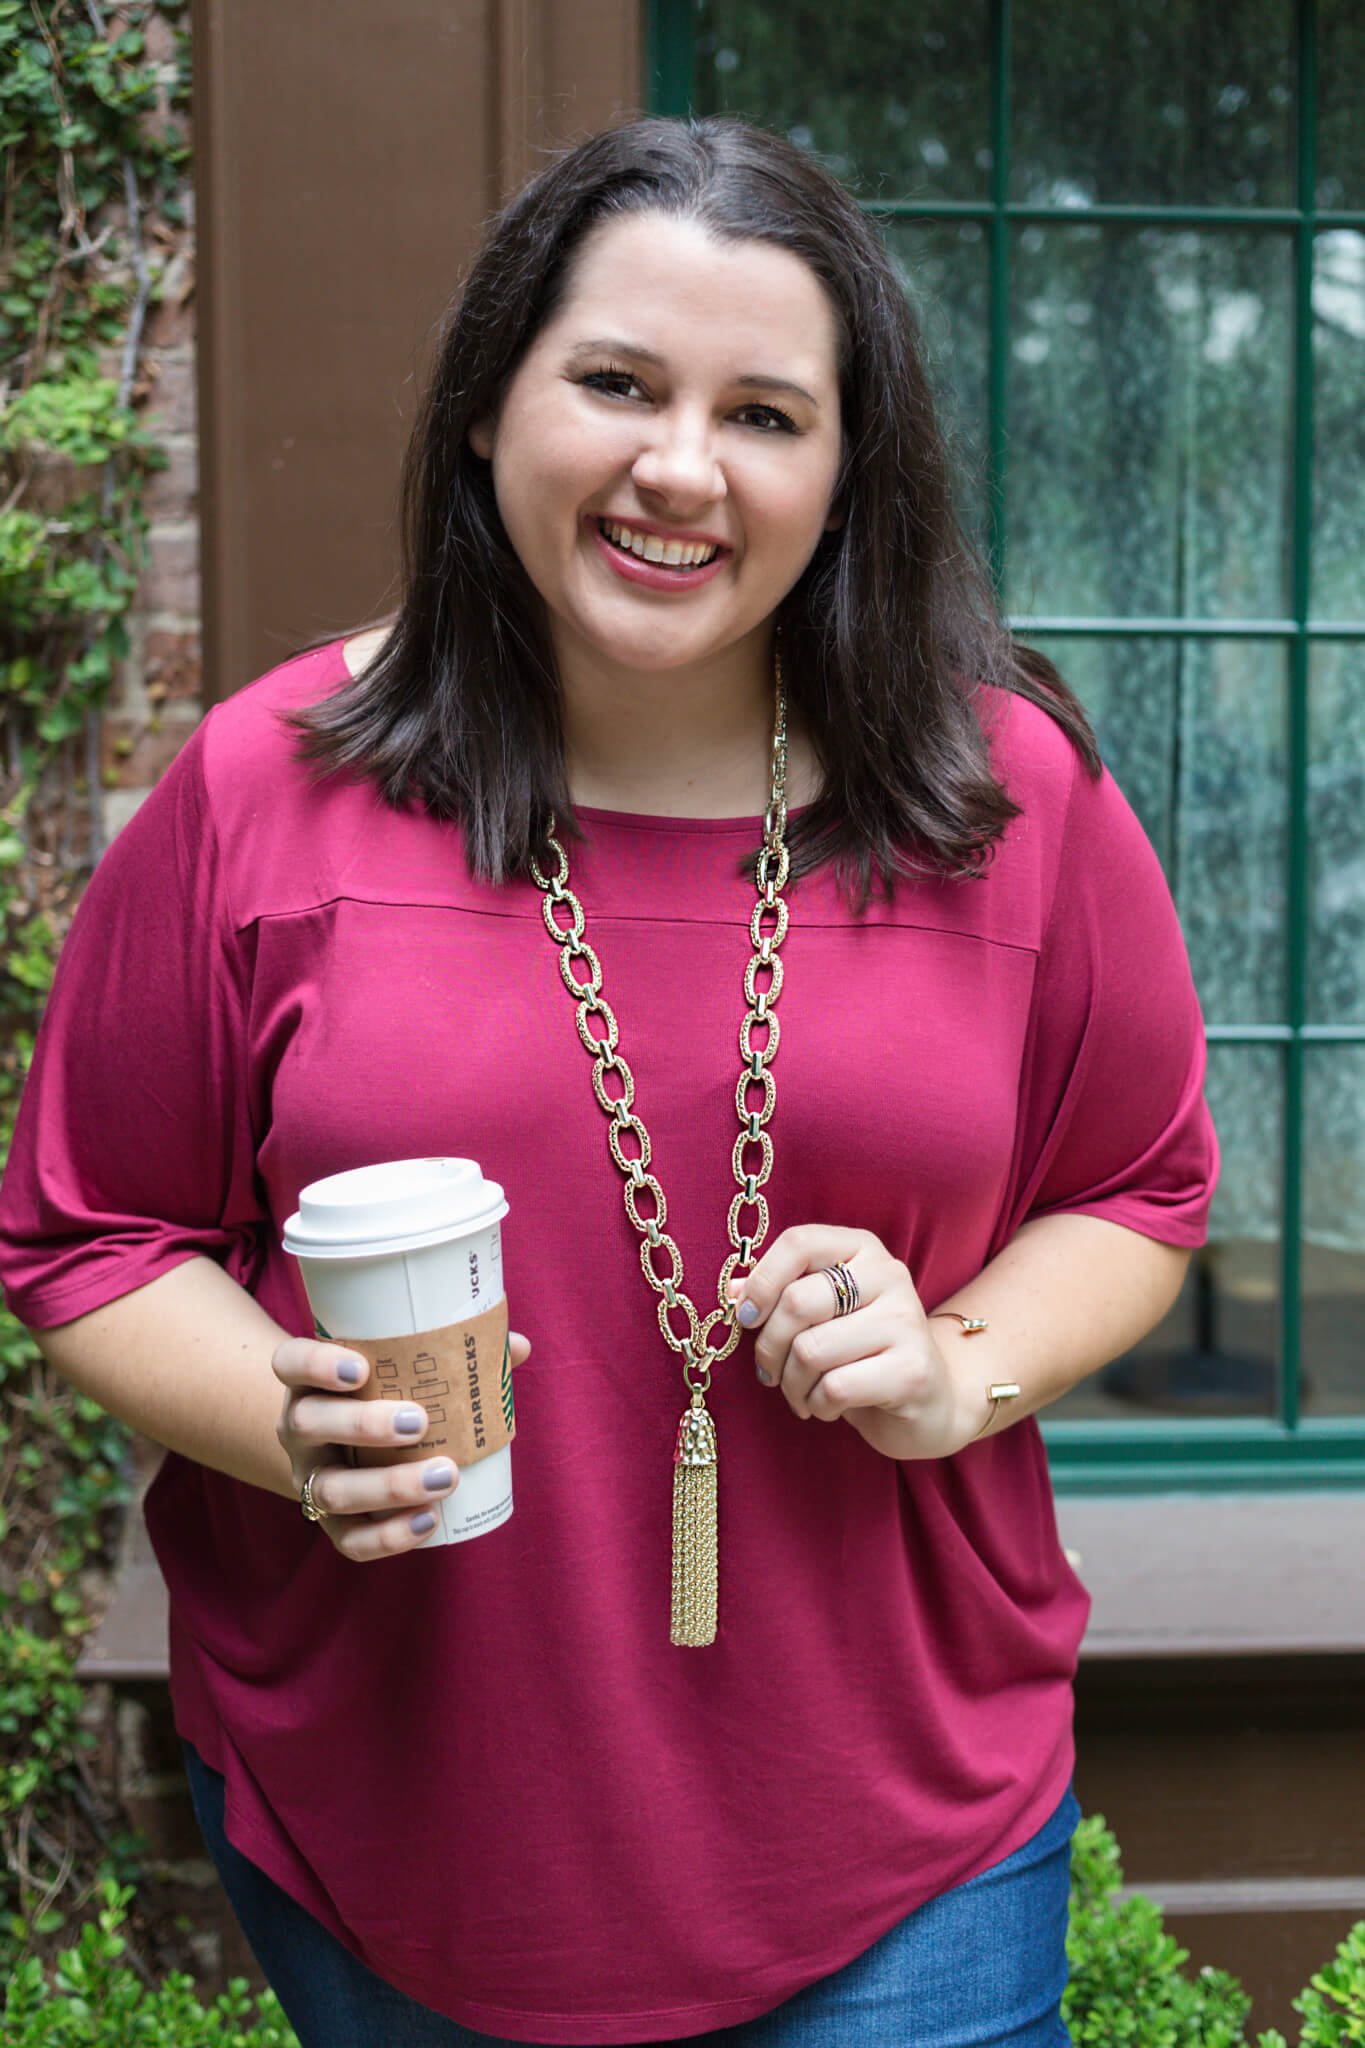 A fringe pair of jeans, a comfortable cotton top and a statement necklace makes for the perfect weekend outfit during this fall transition. This outfit is featured in the latest blog post on Something Gold, Something Blue, a curvy style blog by Emily Bastedo.